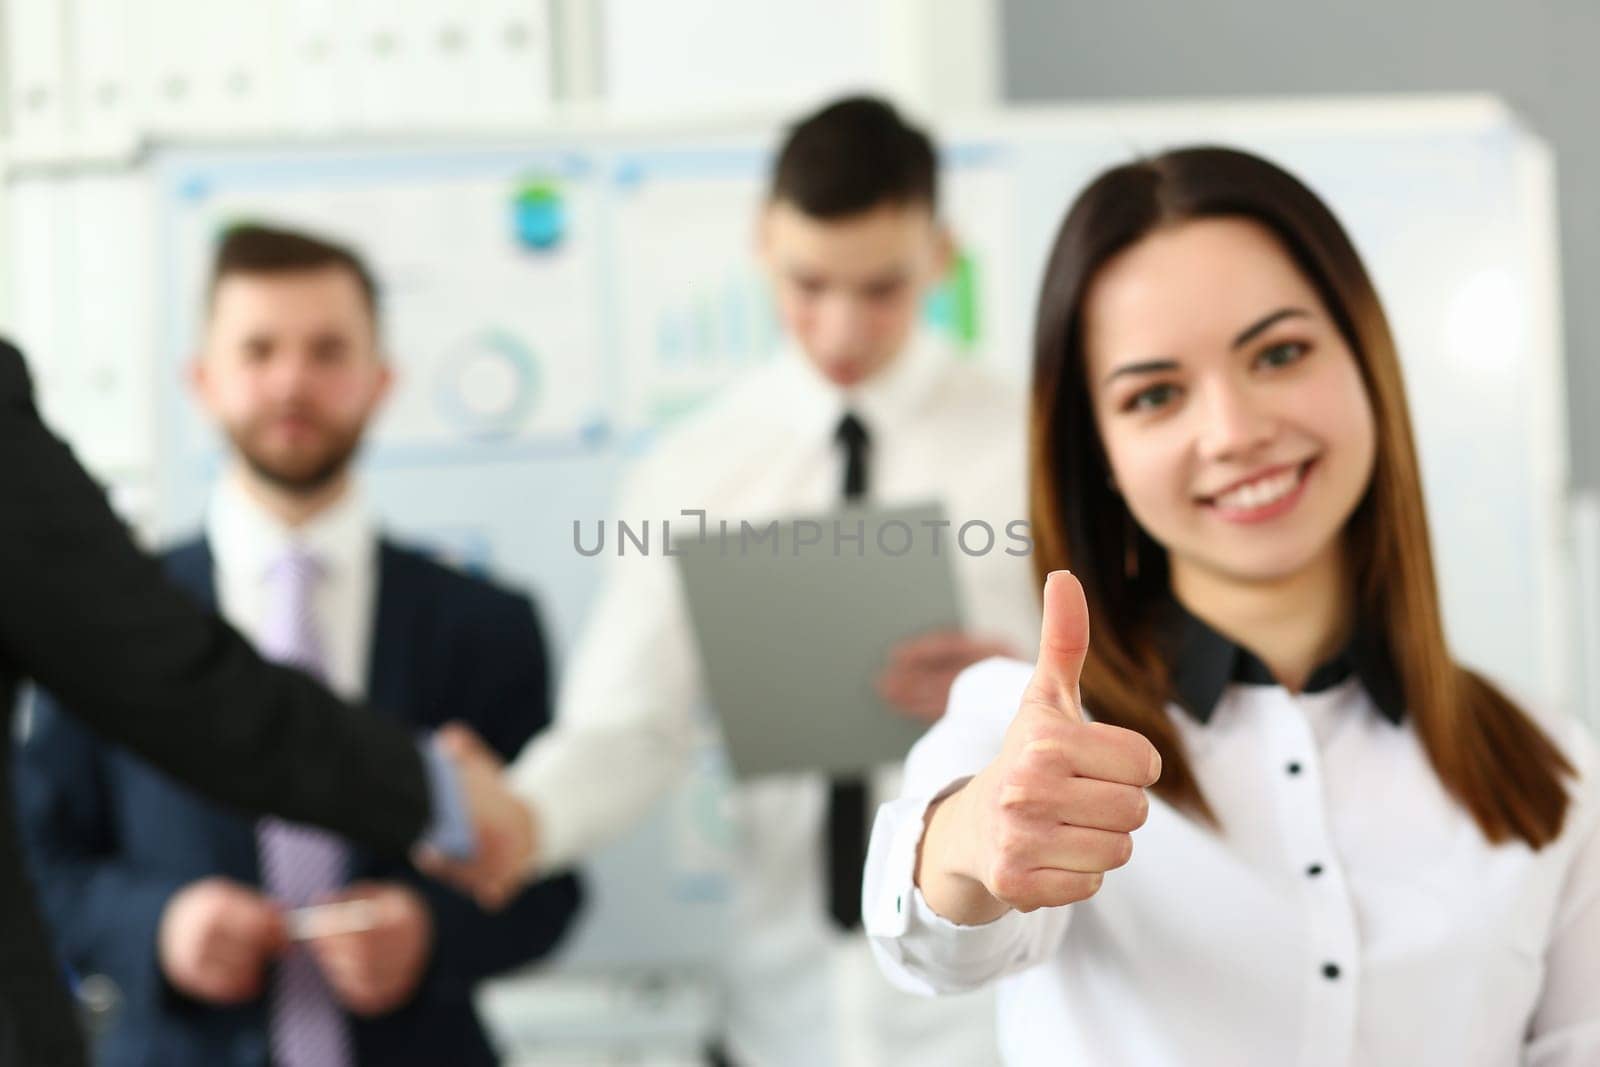 Businesswoman feels confident in team and thumbs up gesture. Happy businesswoman showing thumbs up and smiling colleagues standing in background